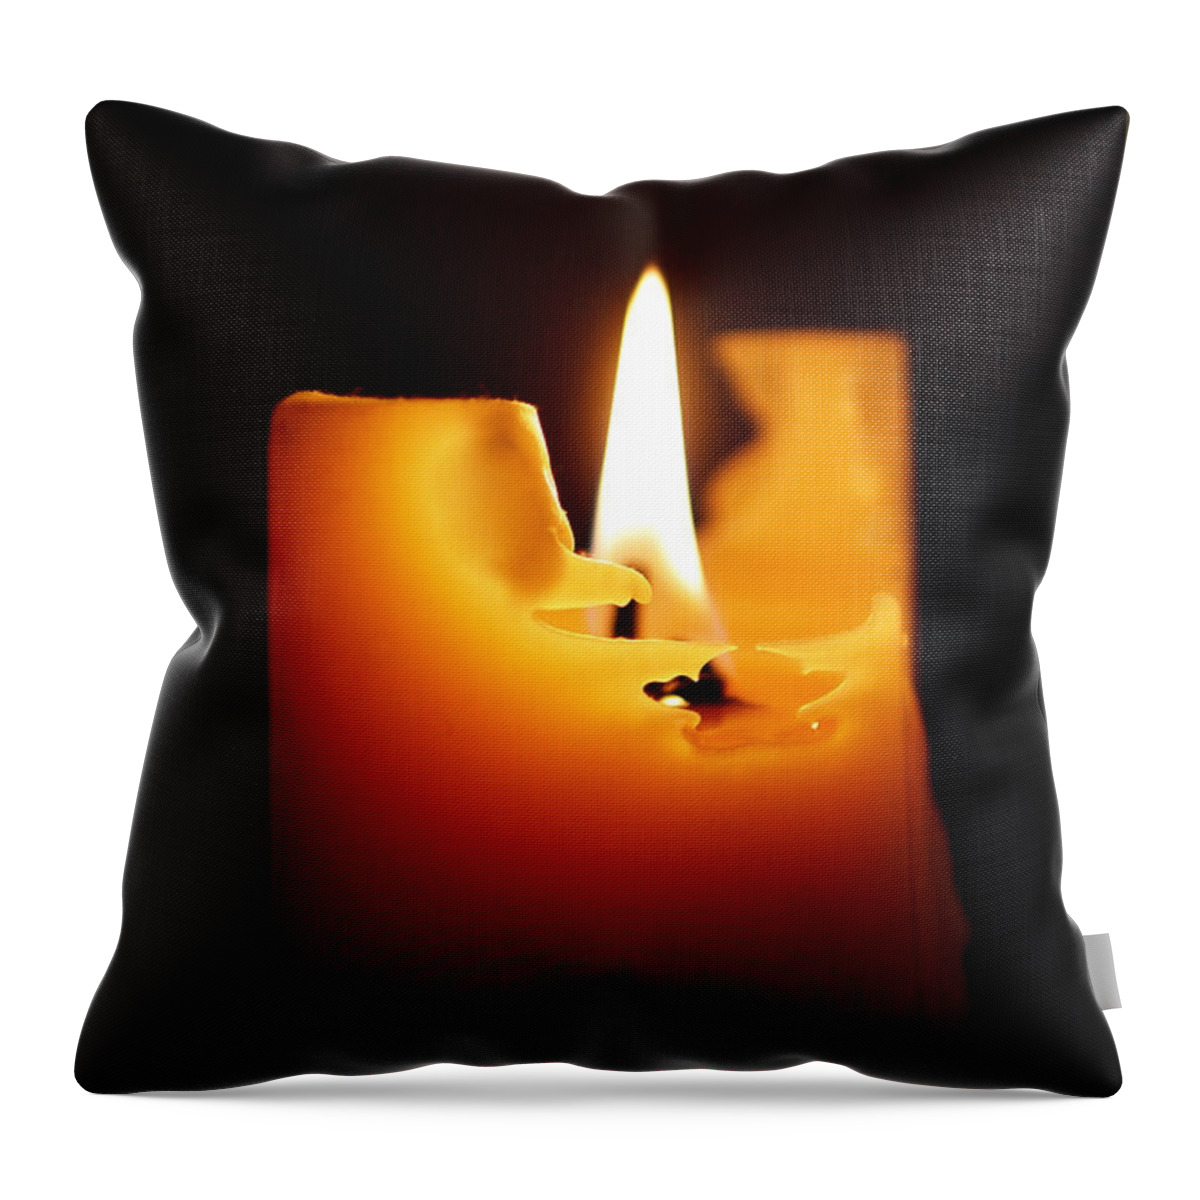 Candlelight Throw Pillow featuring the photograph Candlelight by Rona Black